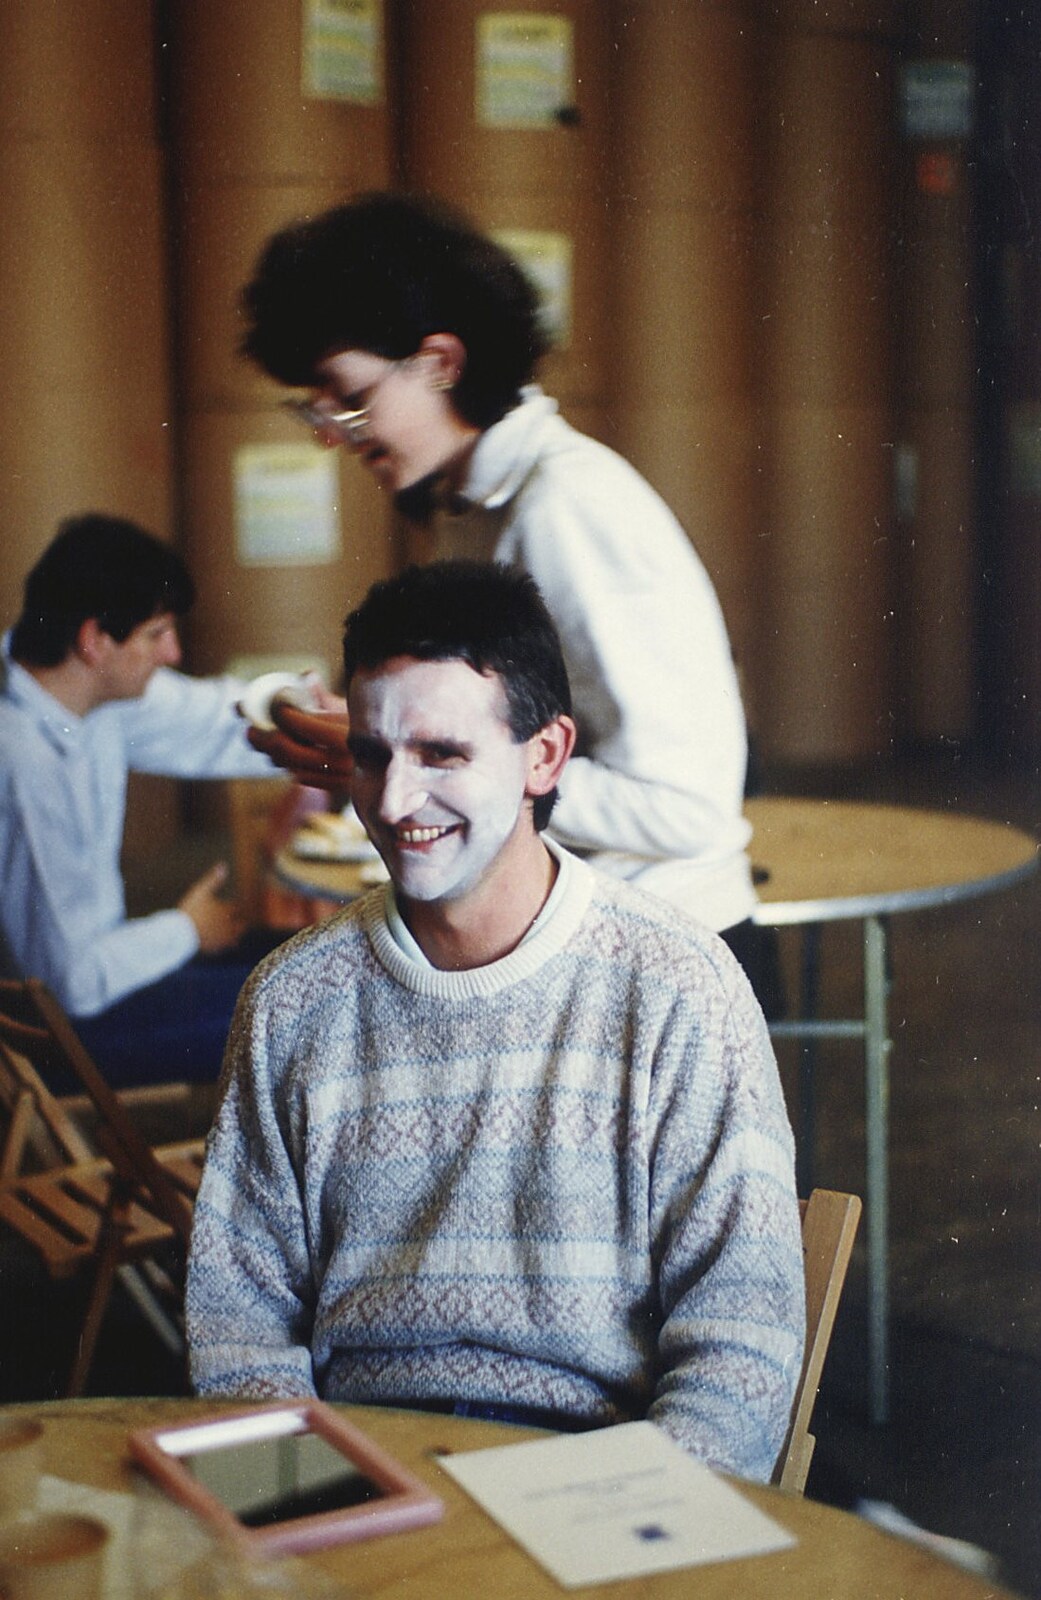 BPCC Anglia Web Open Day, Diss, Norfolk - 23rd June 1990: One of the factory dudes gets face-painted in the paper warehouse